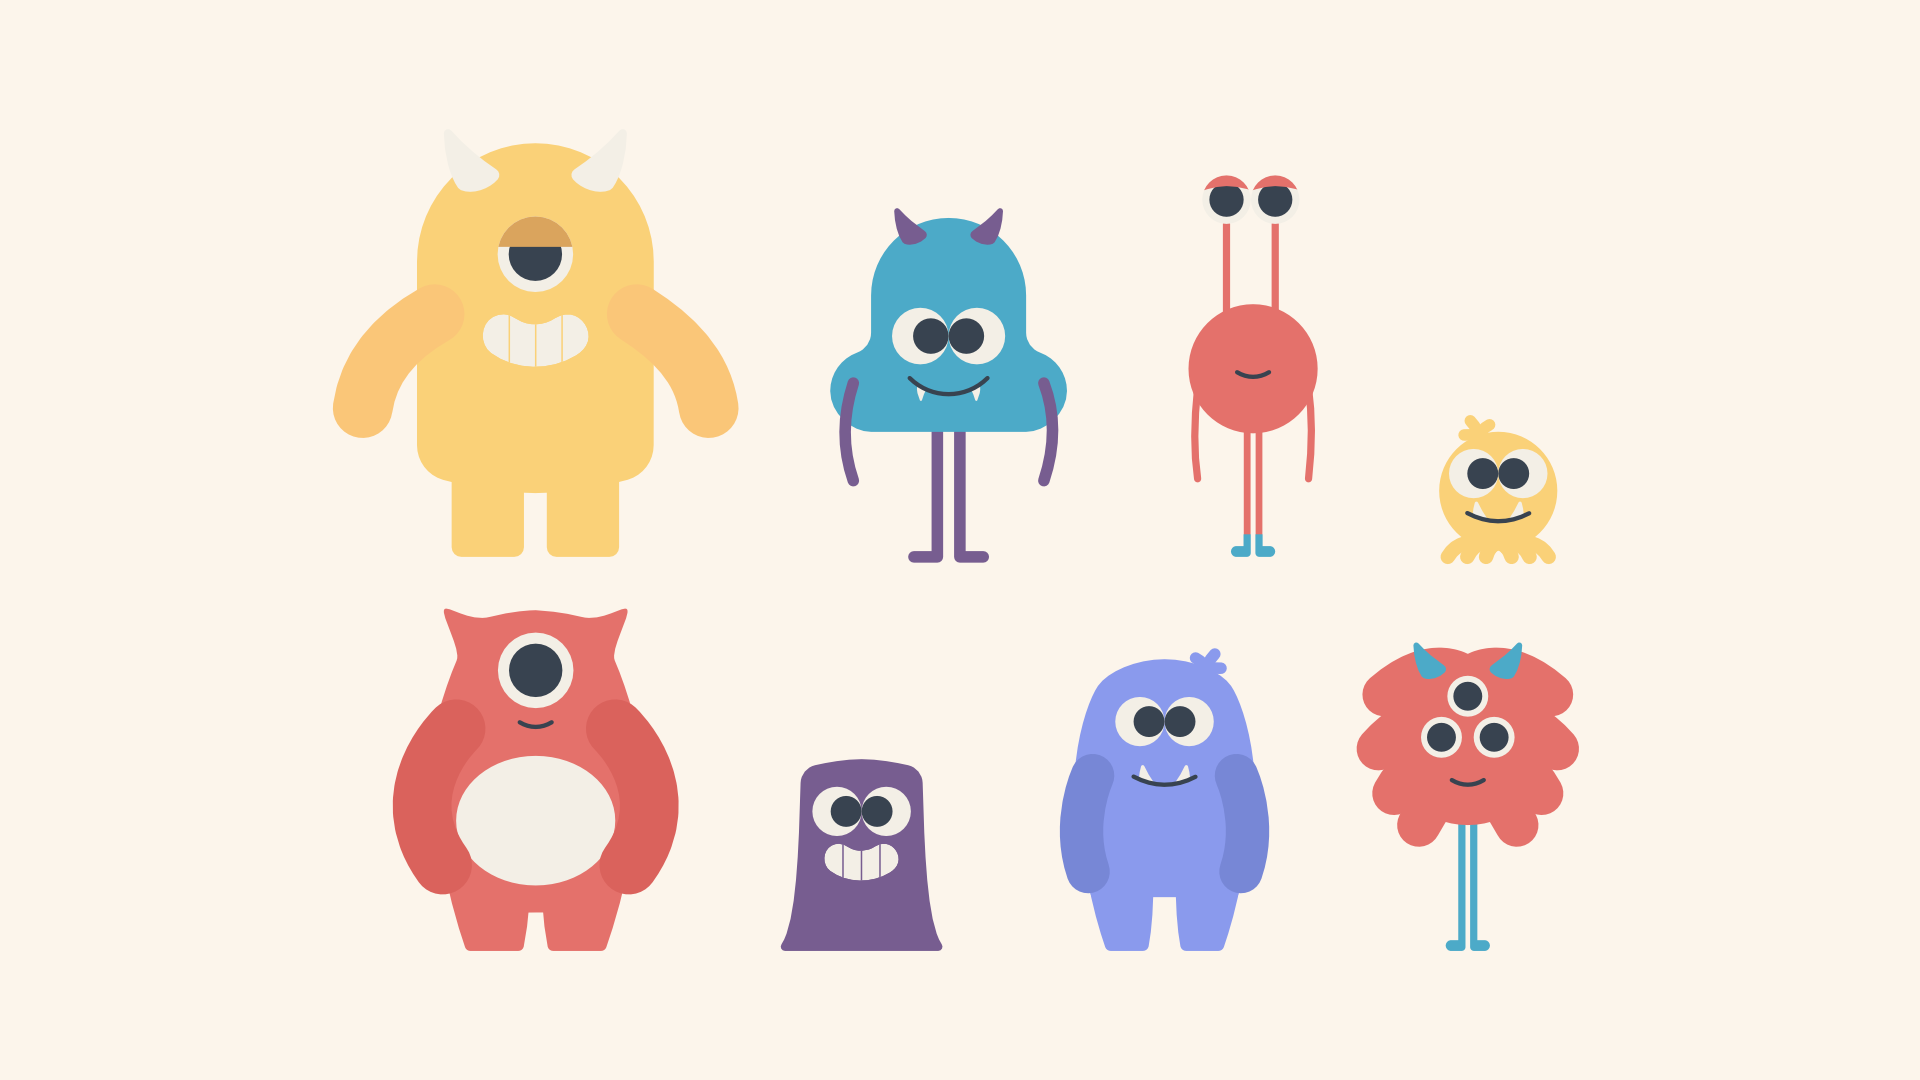 Illustration of cartoon monsters in different sizes and colours.